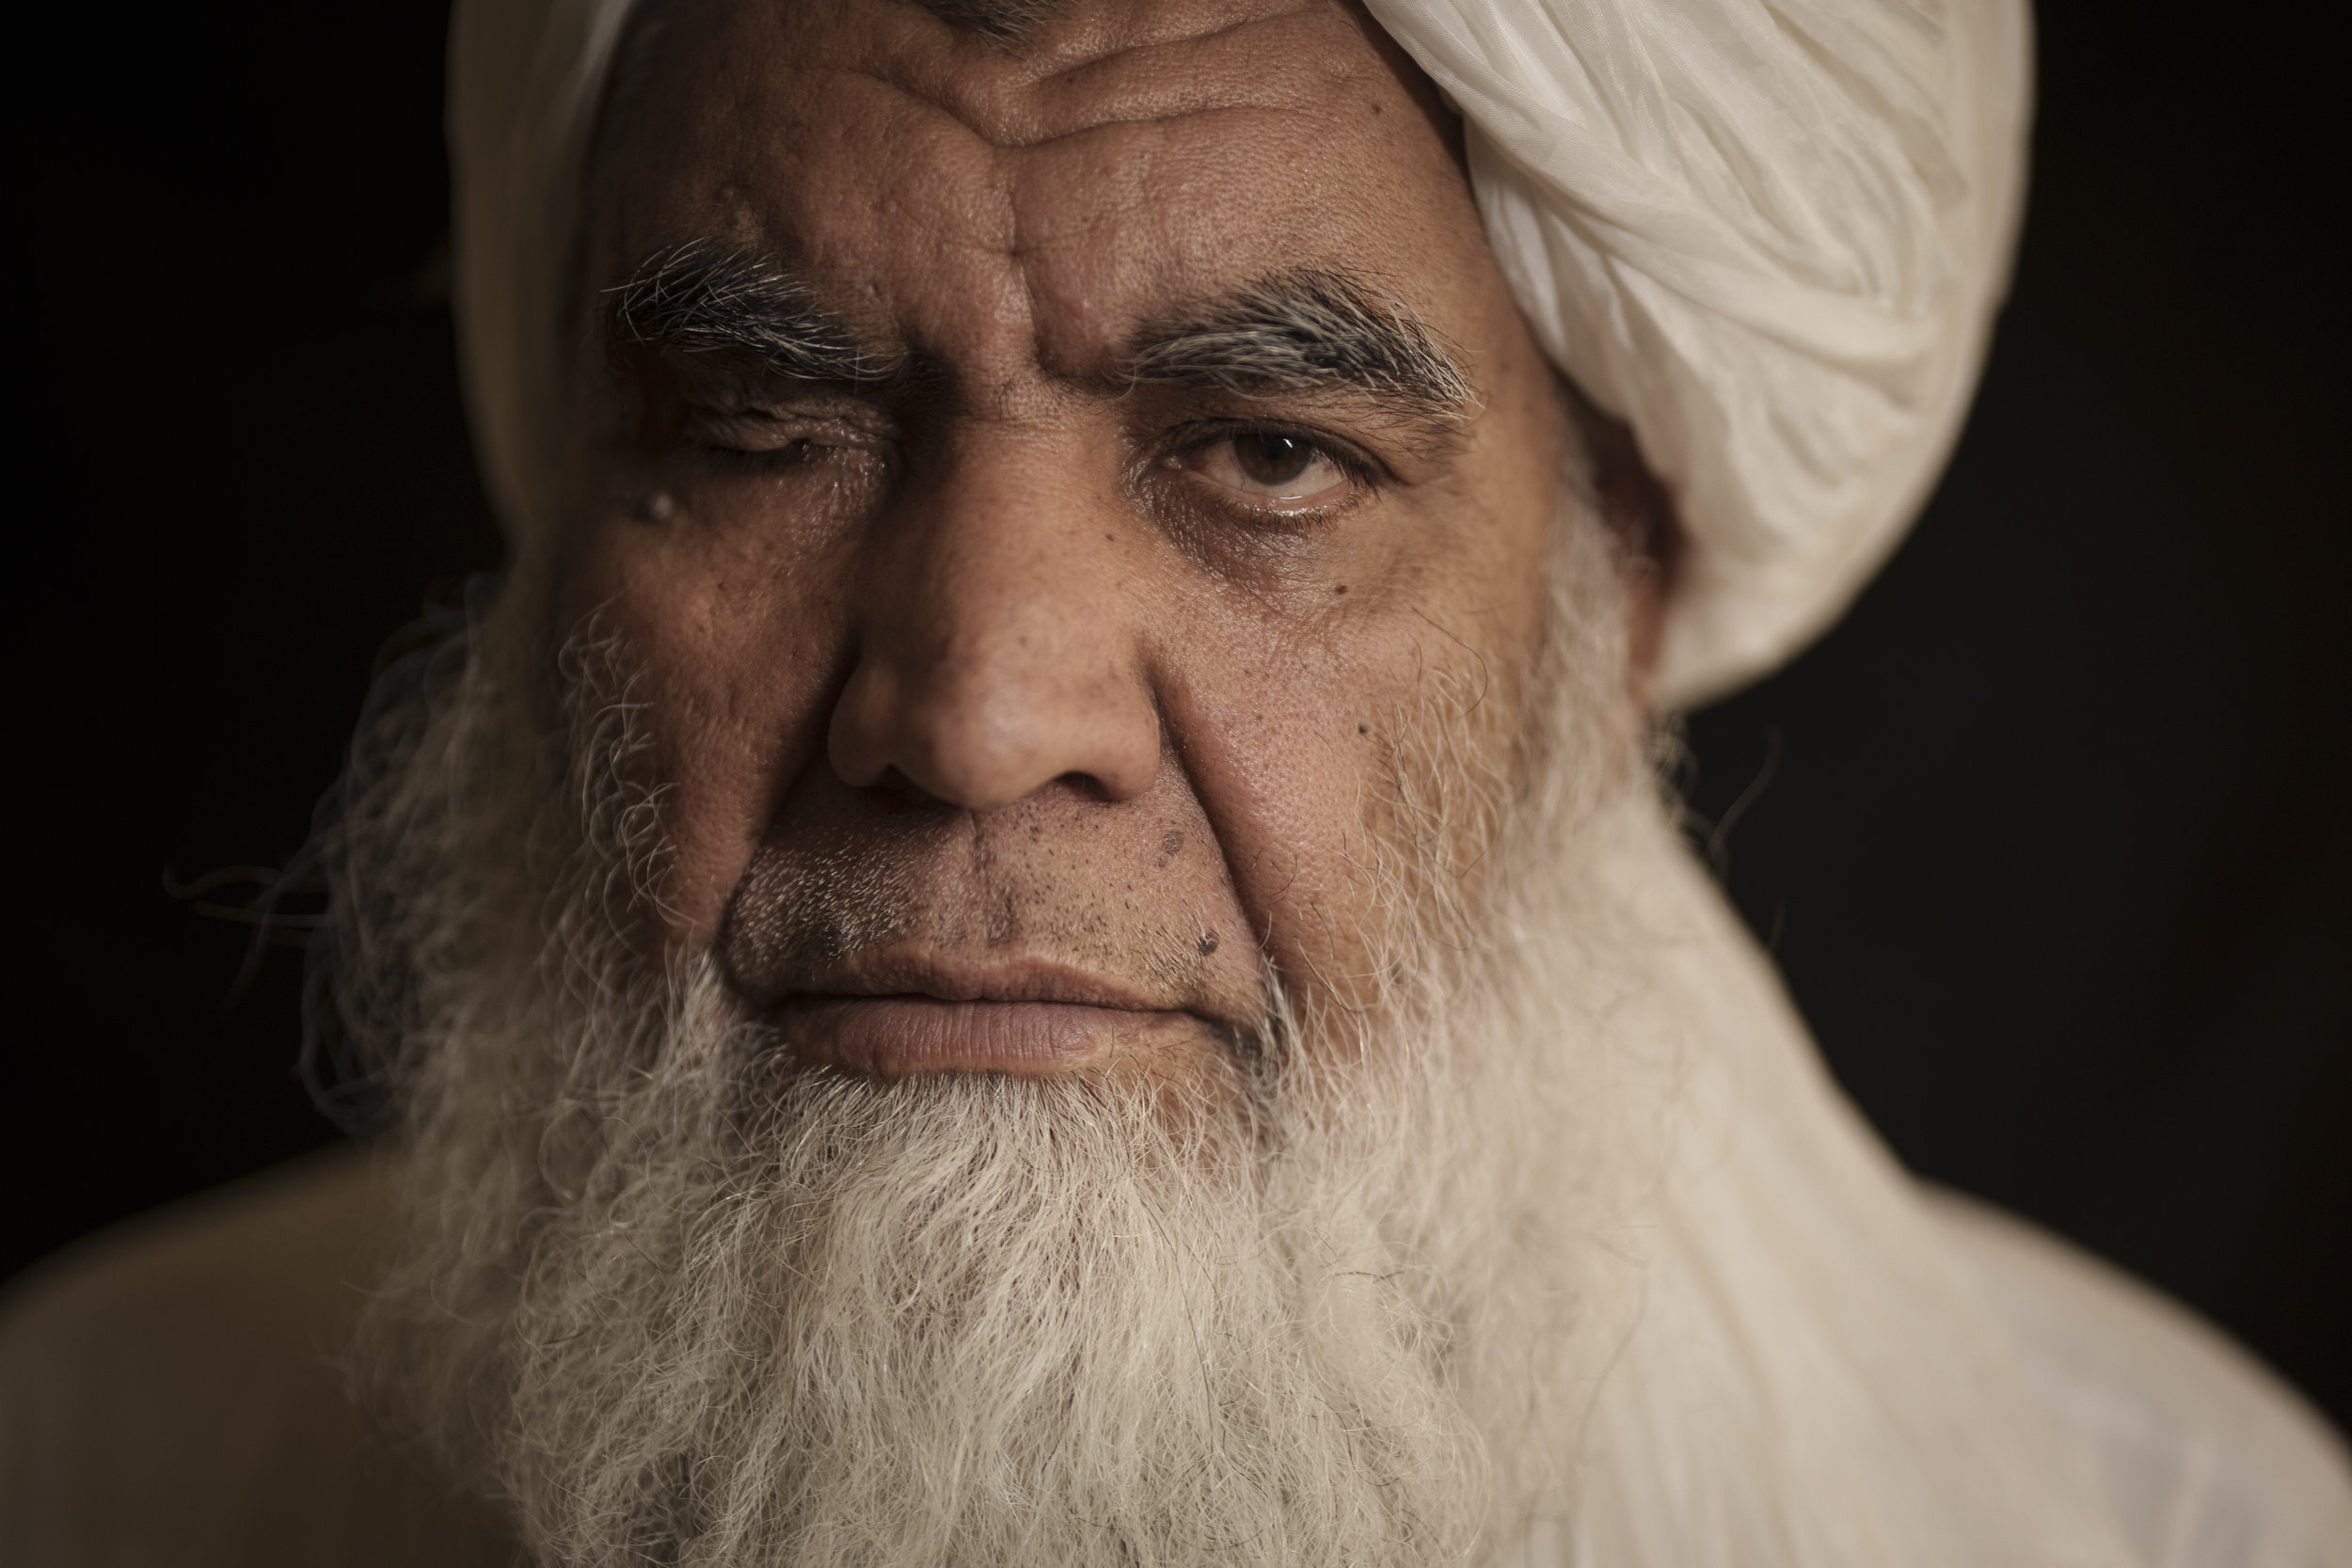  Taliban leader Mullah Nooruddin Turabi poses for a photo in Kabul, Afghanistan, on Sept. 22, 2021. Mullah Turabi, one of the founders of the Taliban, says the hard-line movement will once again carry out punishments like executions and amputations o